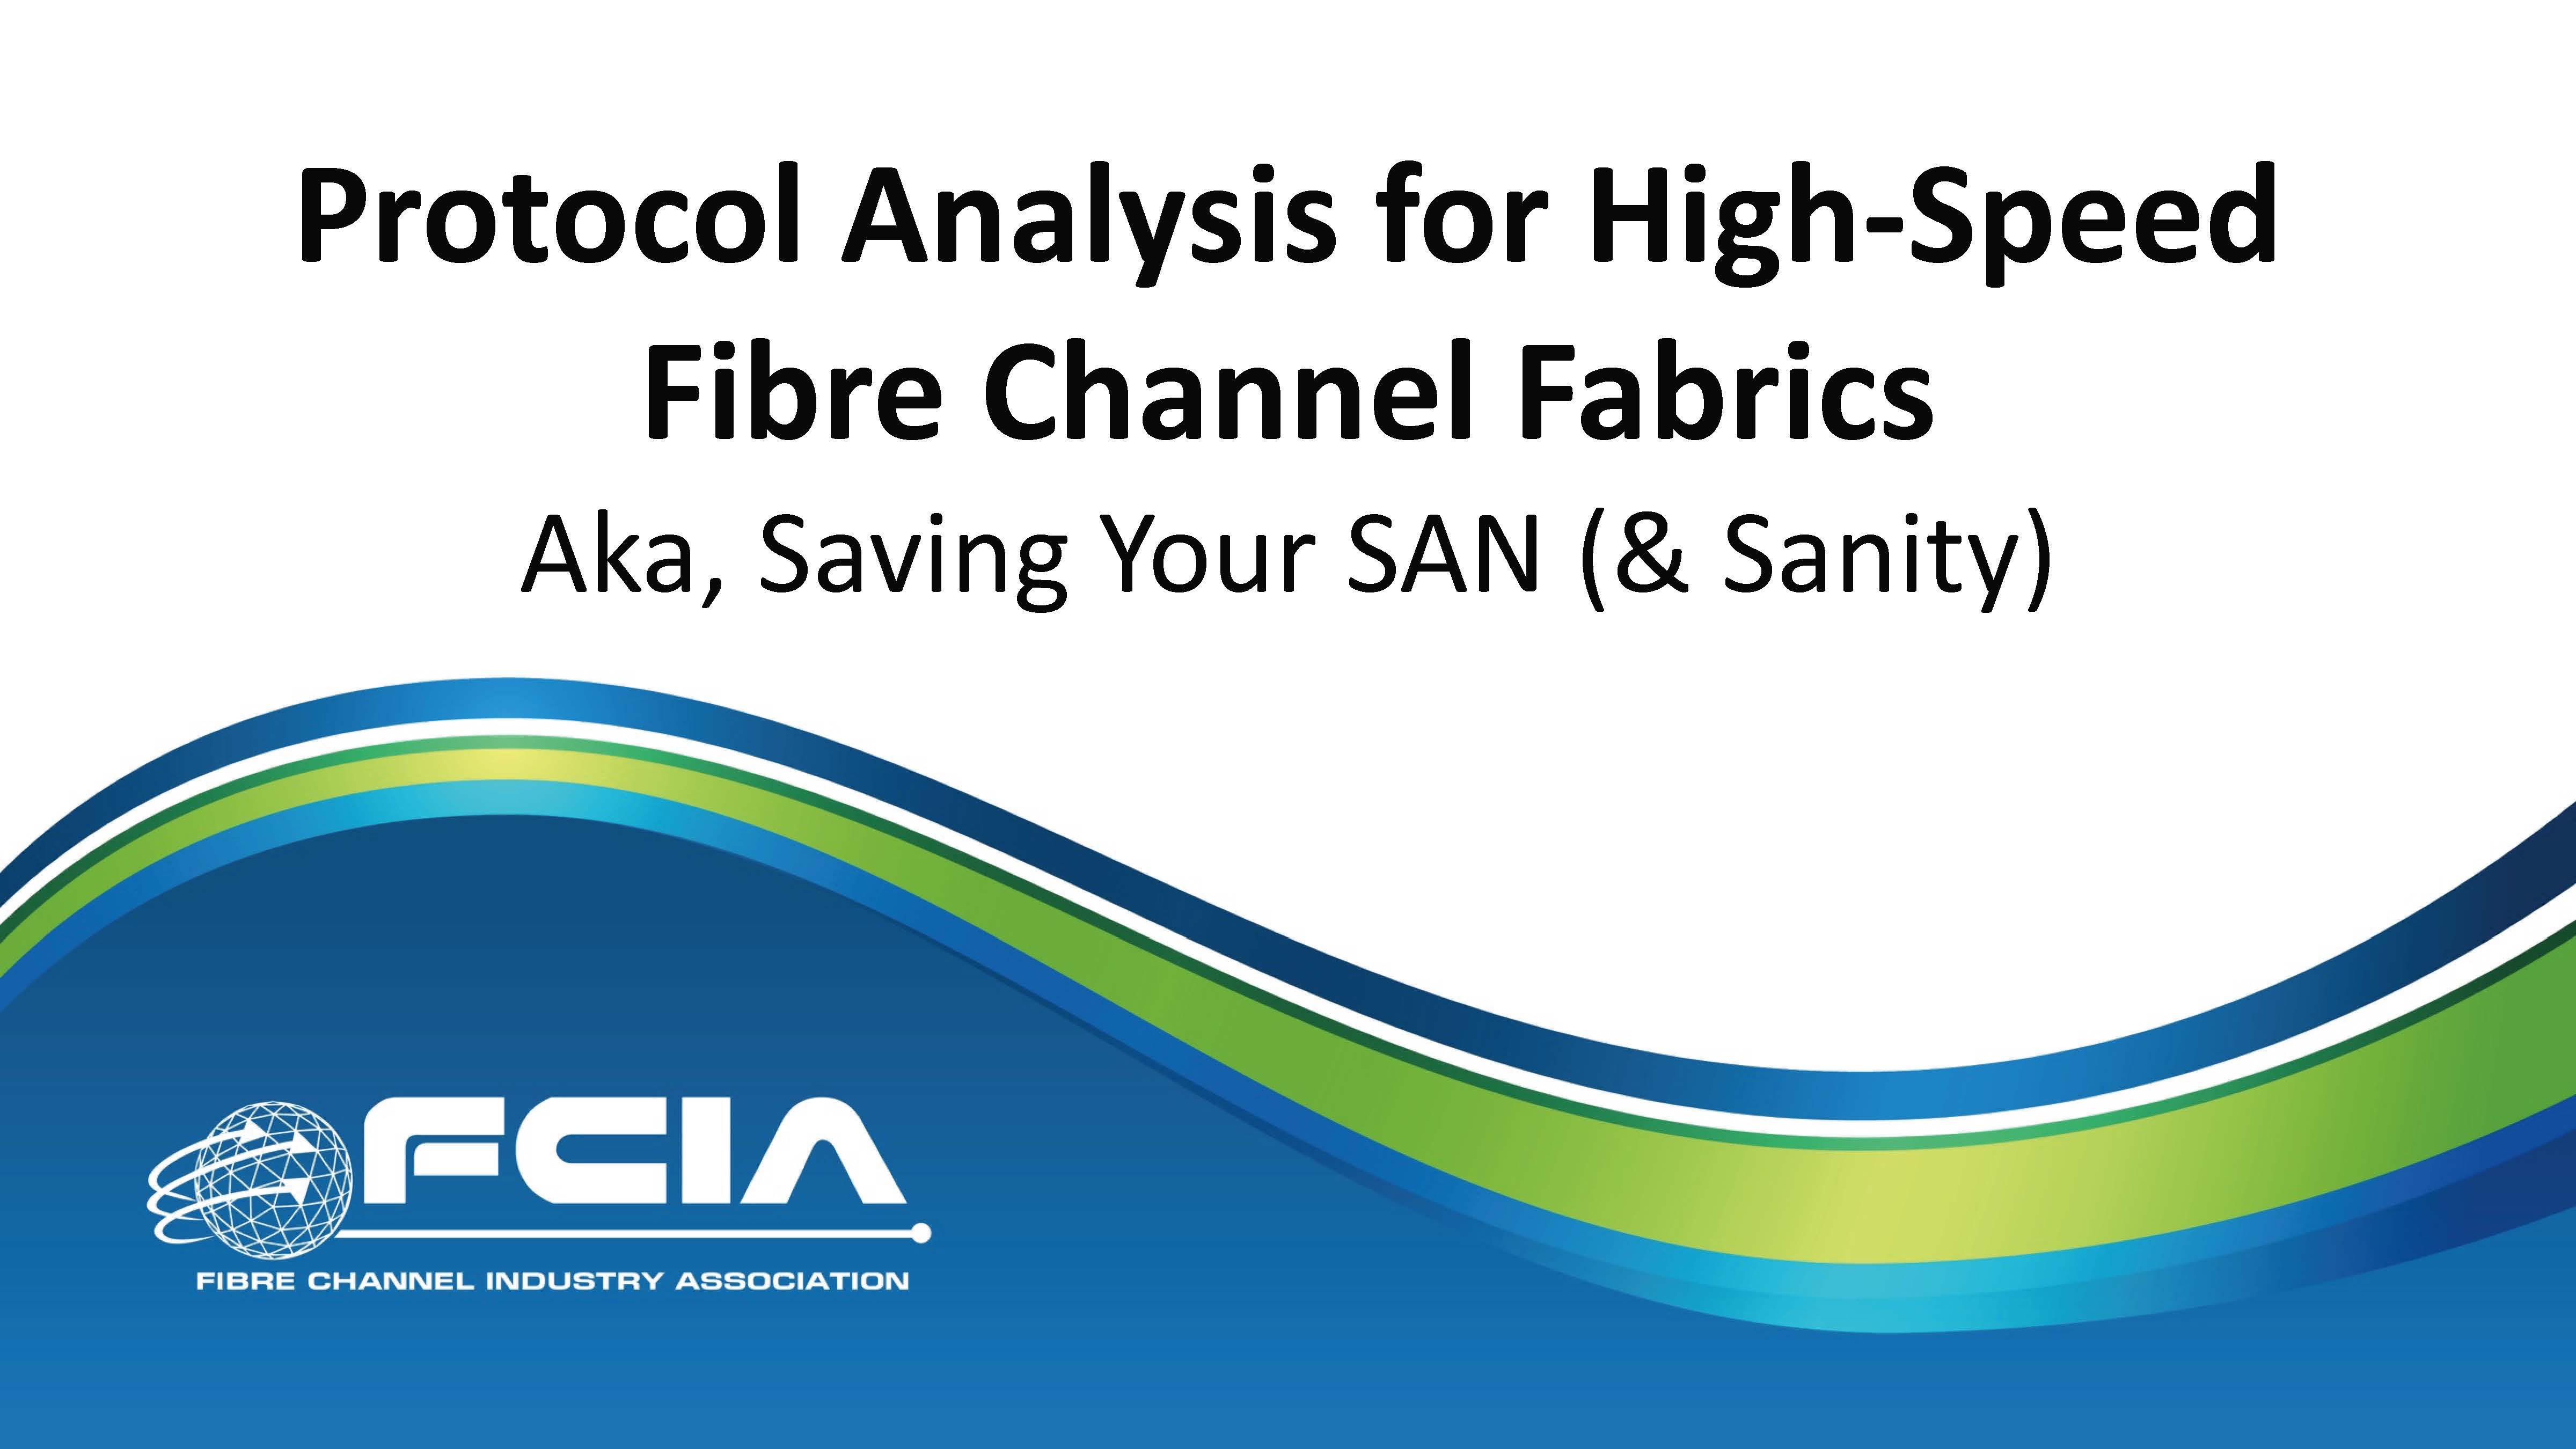 Protocol Analysis for High-Speed Fibre Channel Fabrics